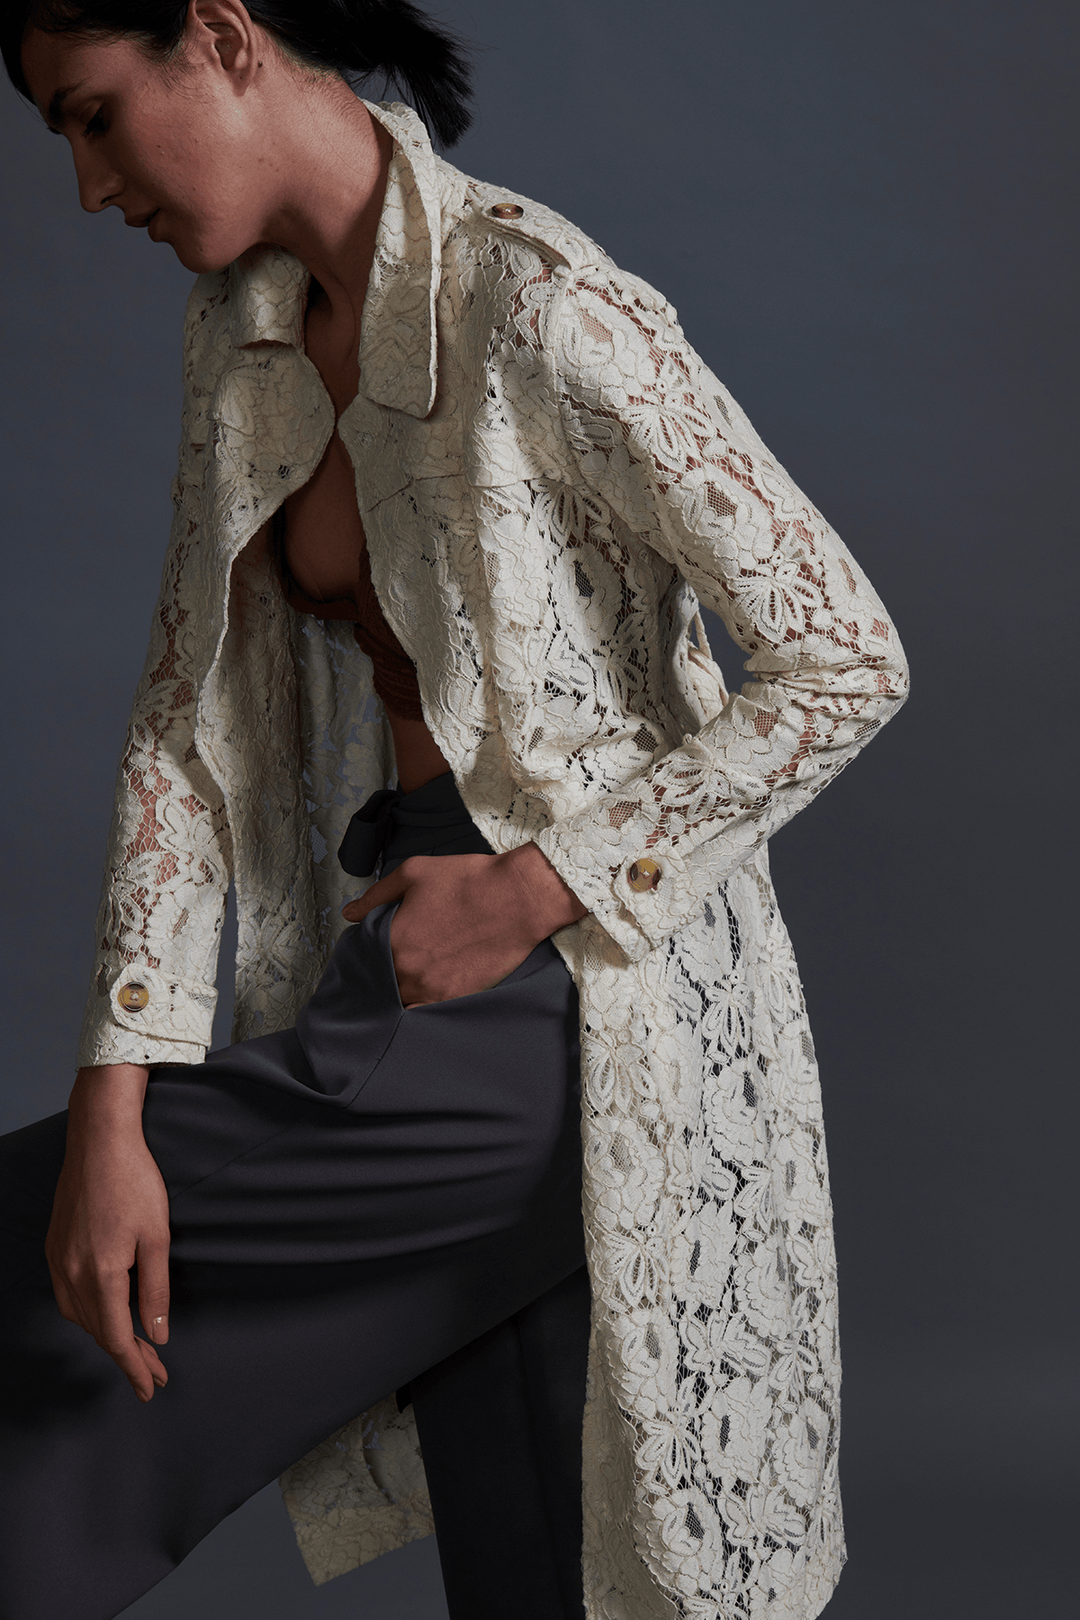 Deconstructed Lace Jacket, a product by Dash & Dot